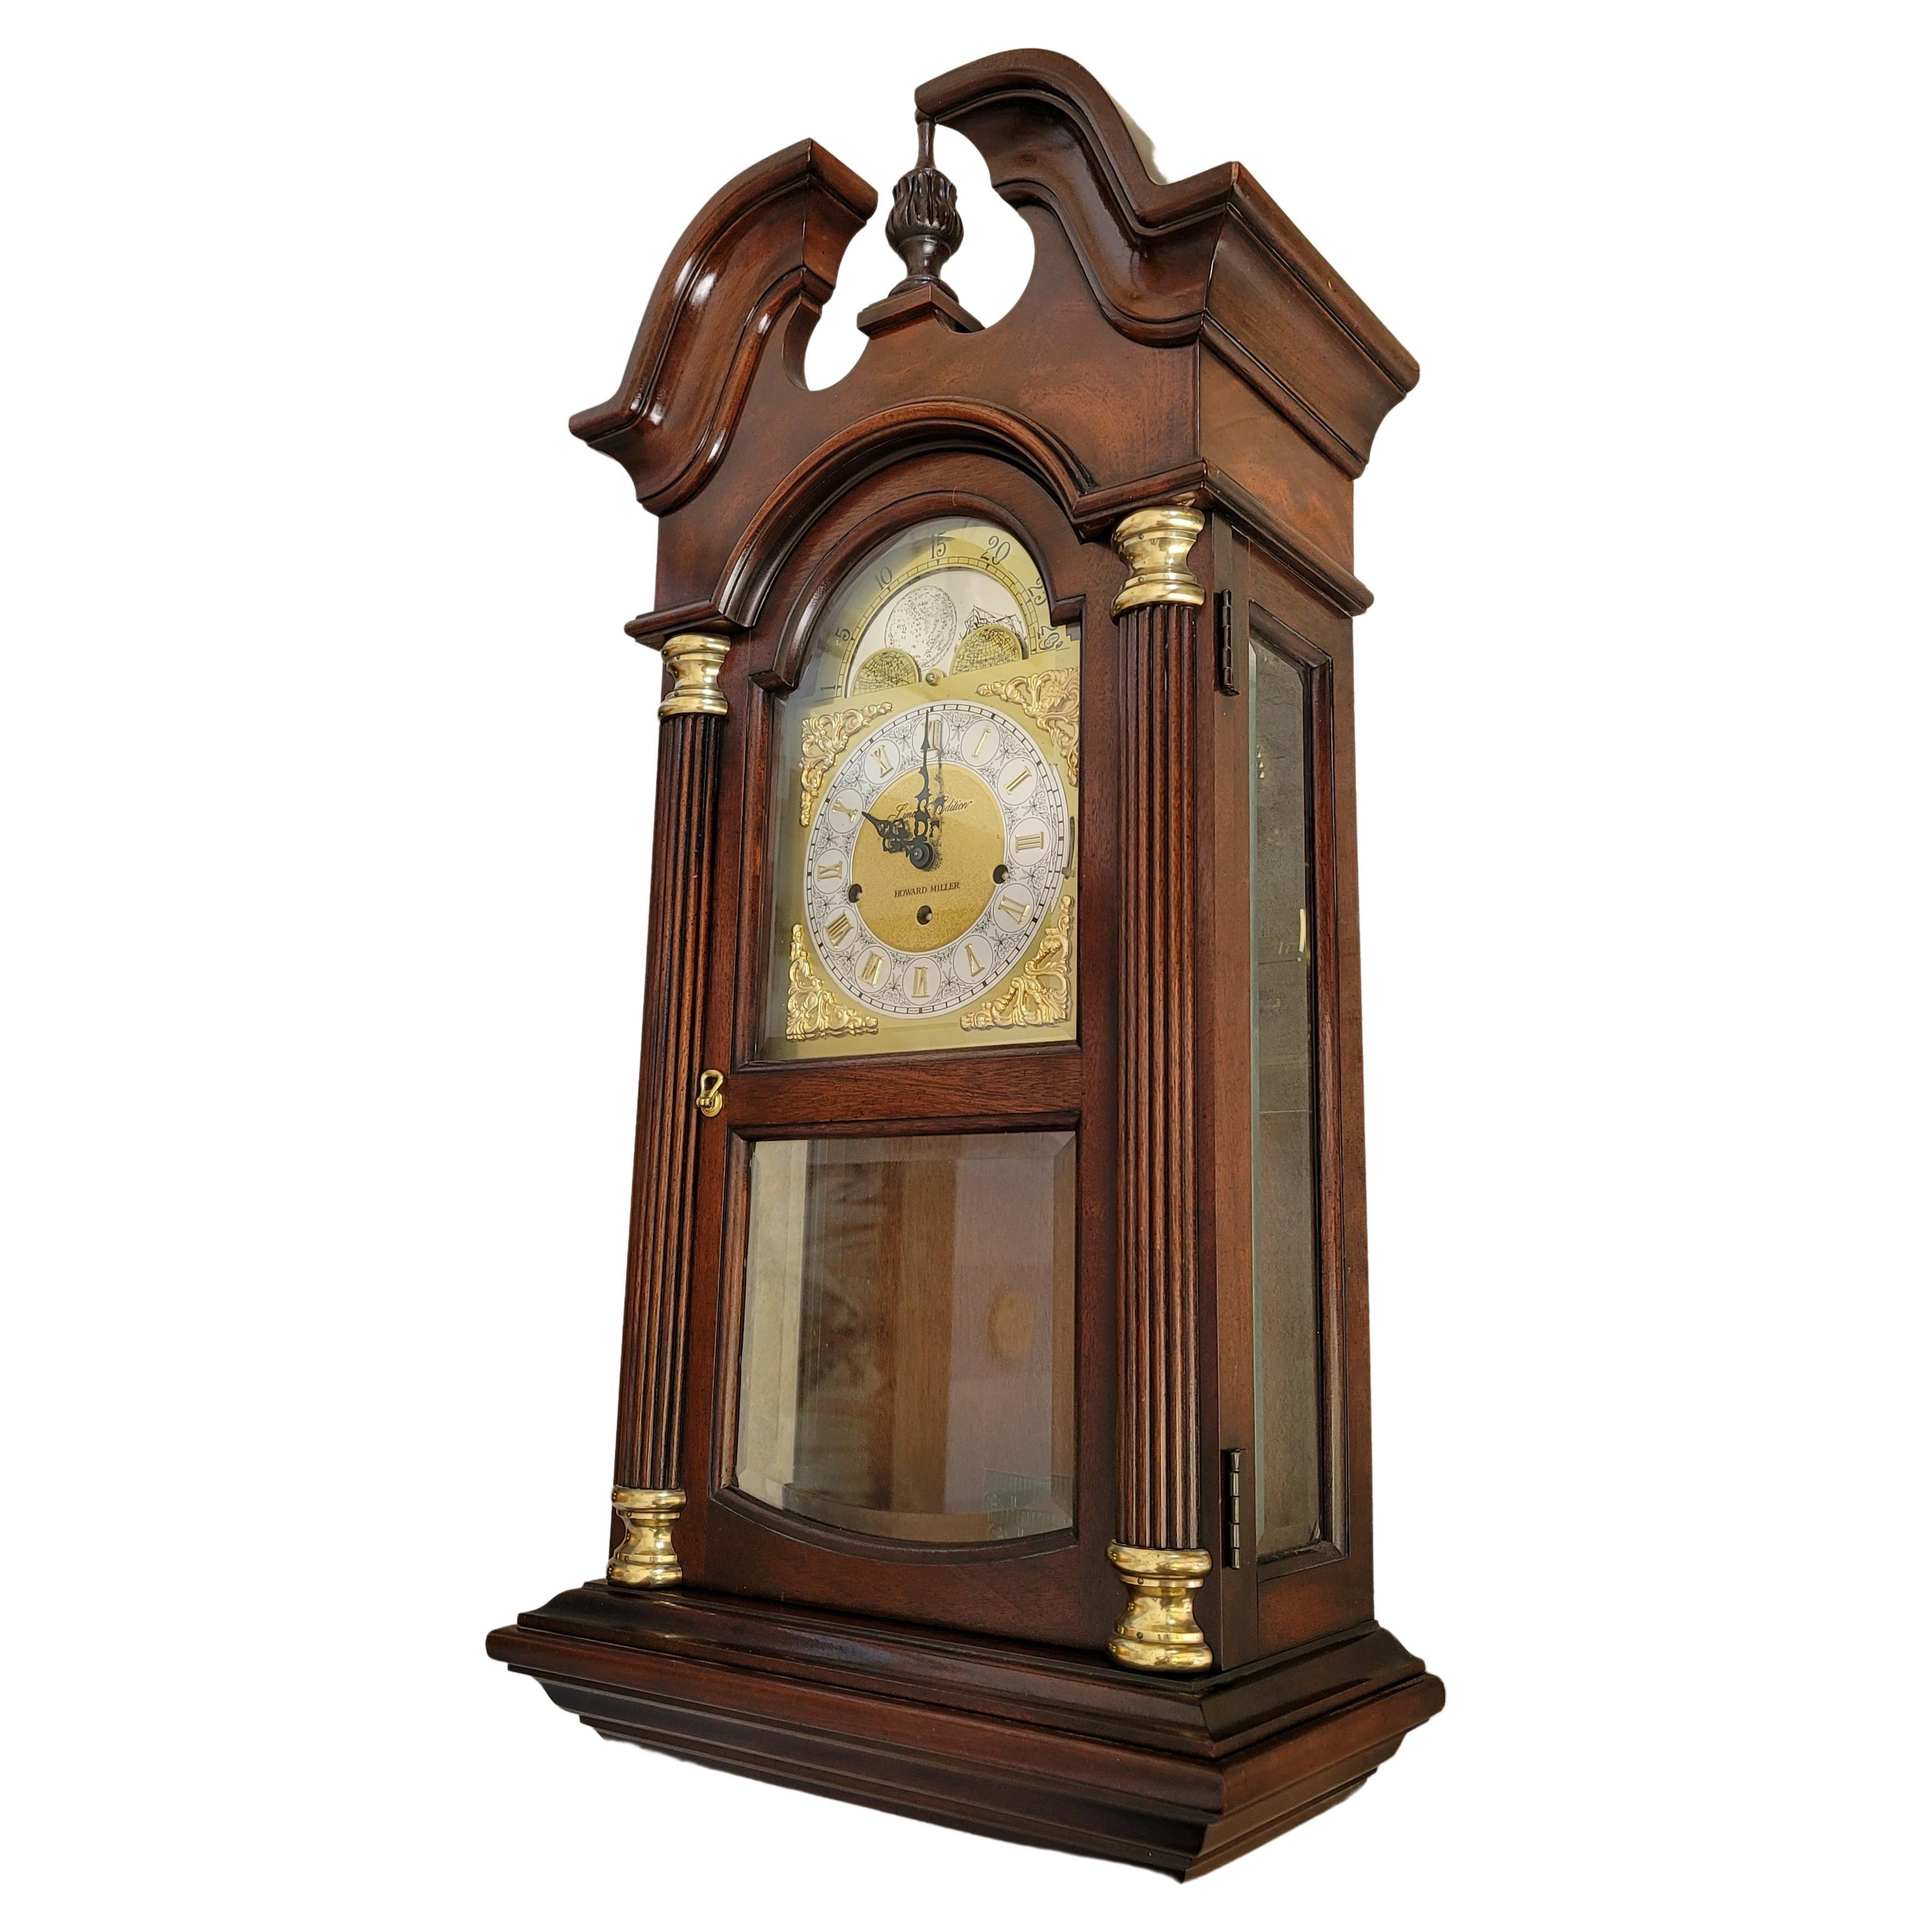 For your consideration is this 1982 Howard Miller Limited Edition Mahogany Hourglass II wall Mantle Clock. Hour glass II has a secret link with the future. One which will not only prove its own authenticity, but document each successive